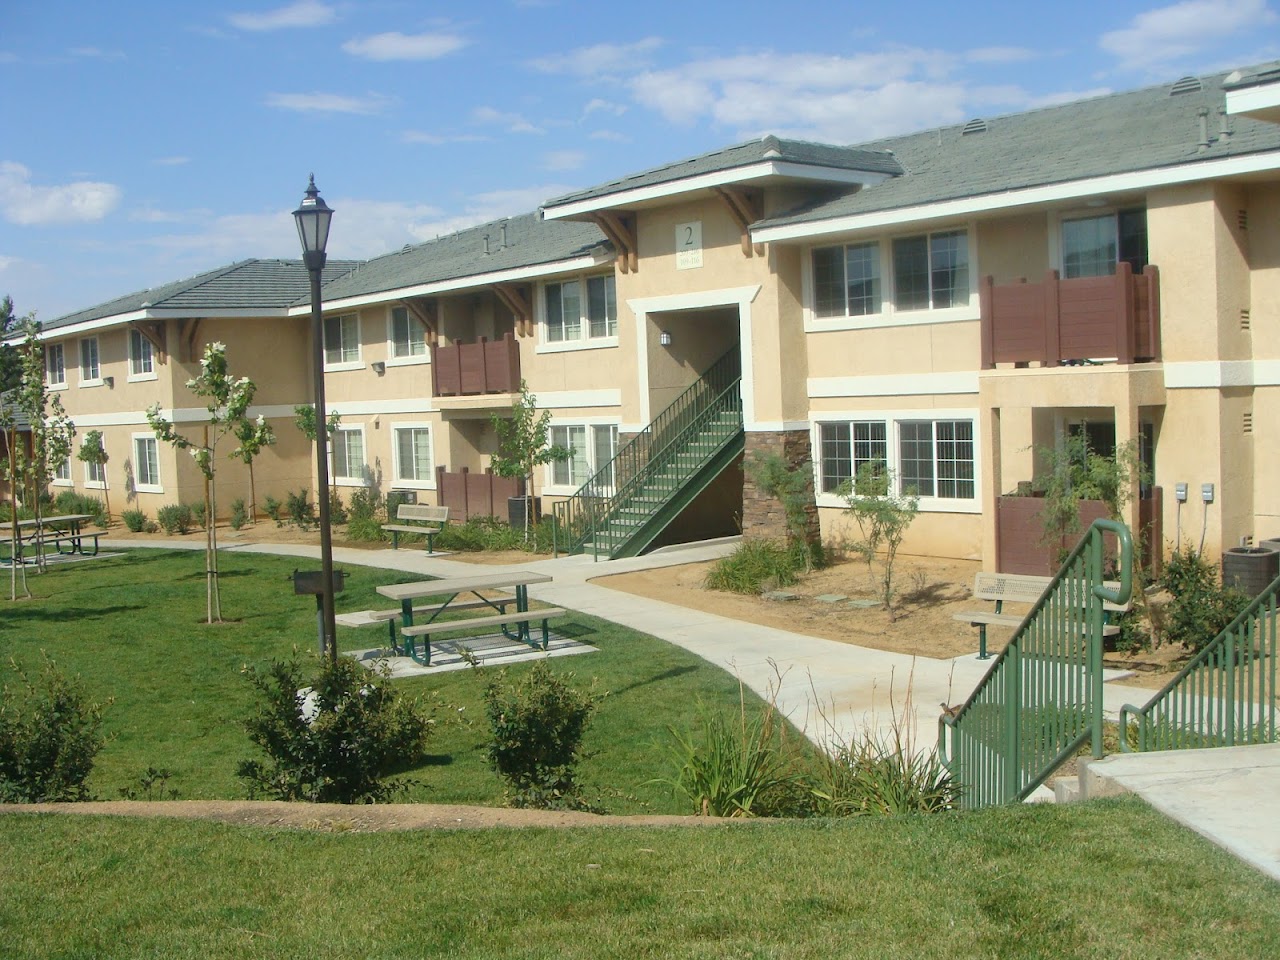 Photo of SUNRISE TERRACE I APTS. Affordable housing located at 16599 MUSCATEL ST HESPERIA, CA 92345